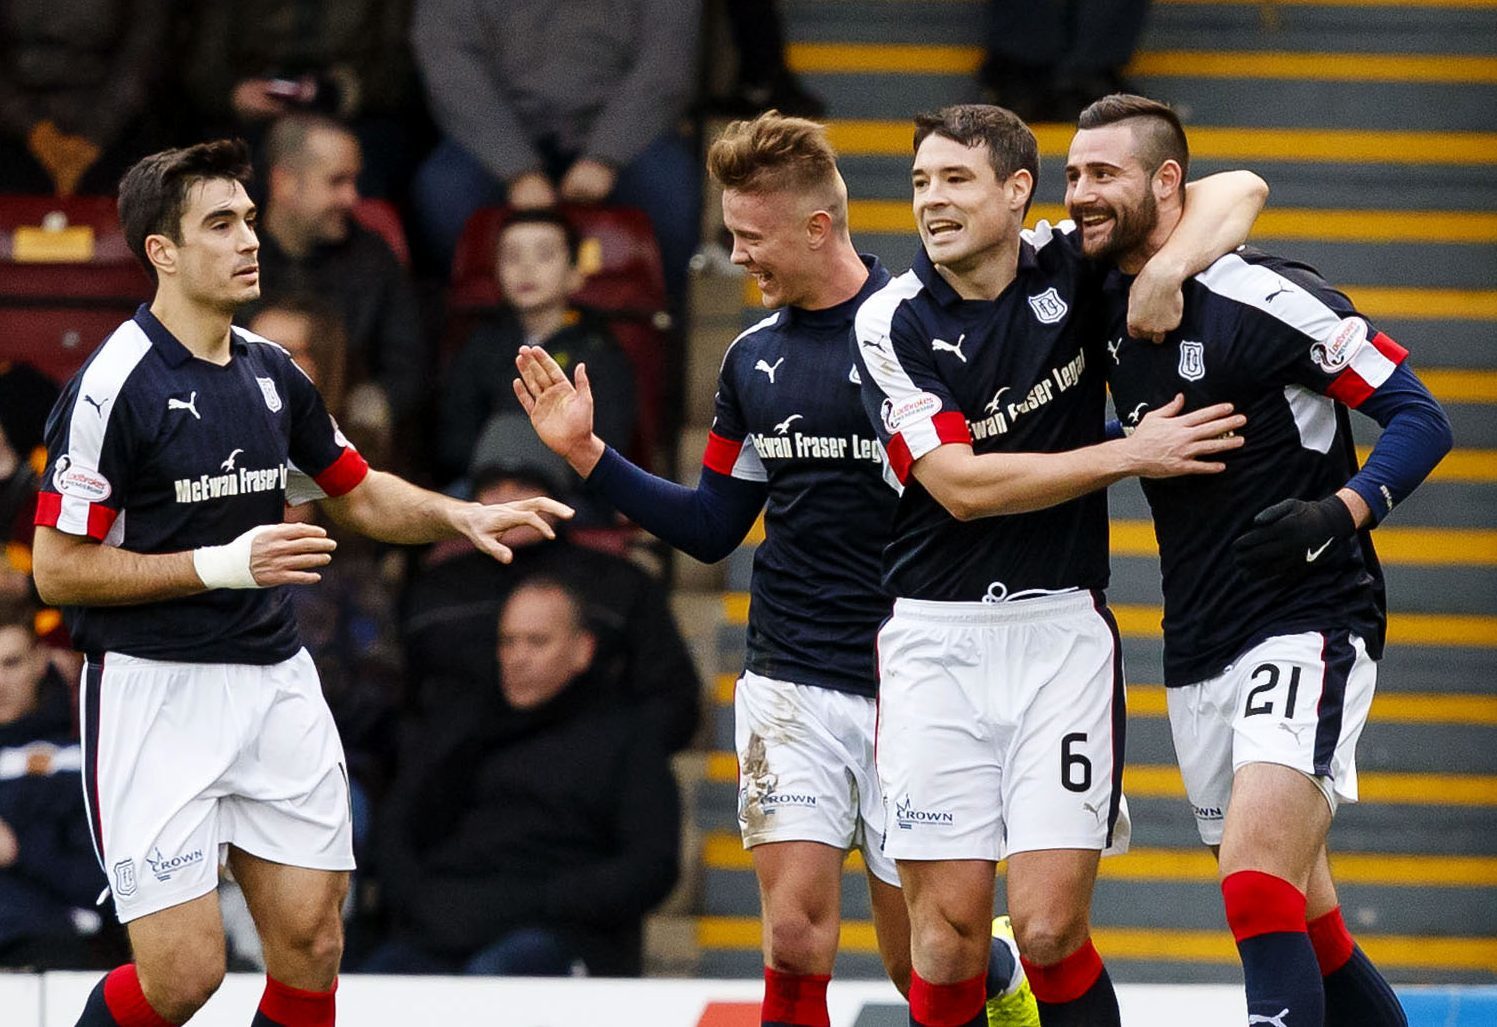 Yet another Dundee goal celebration.